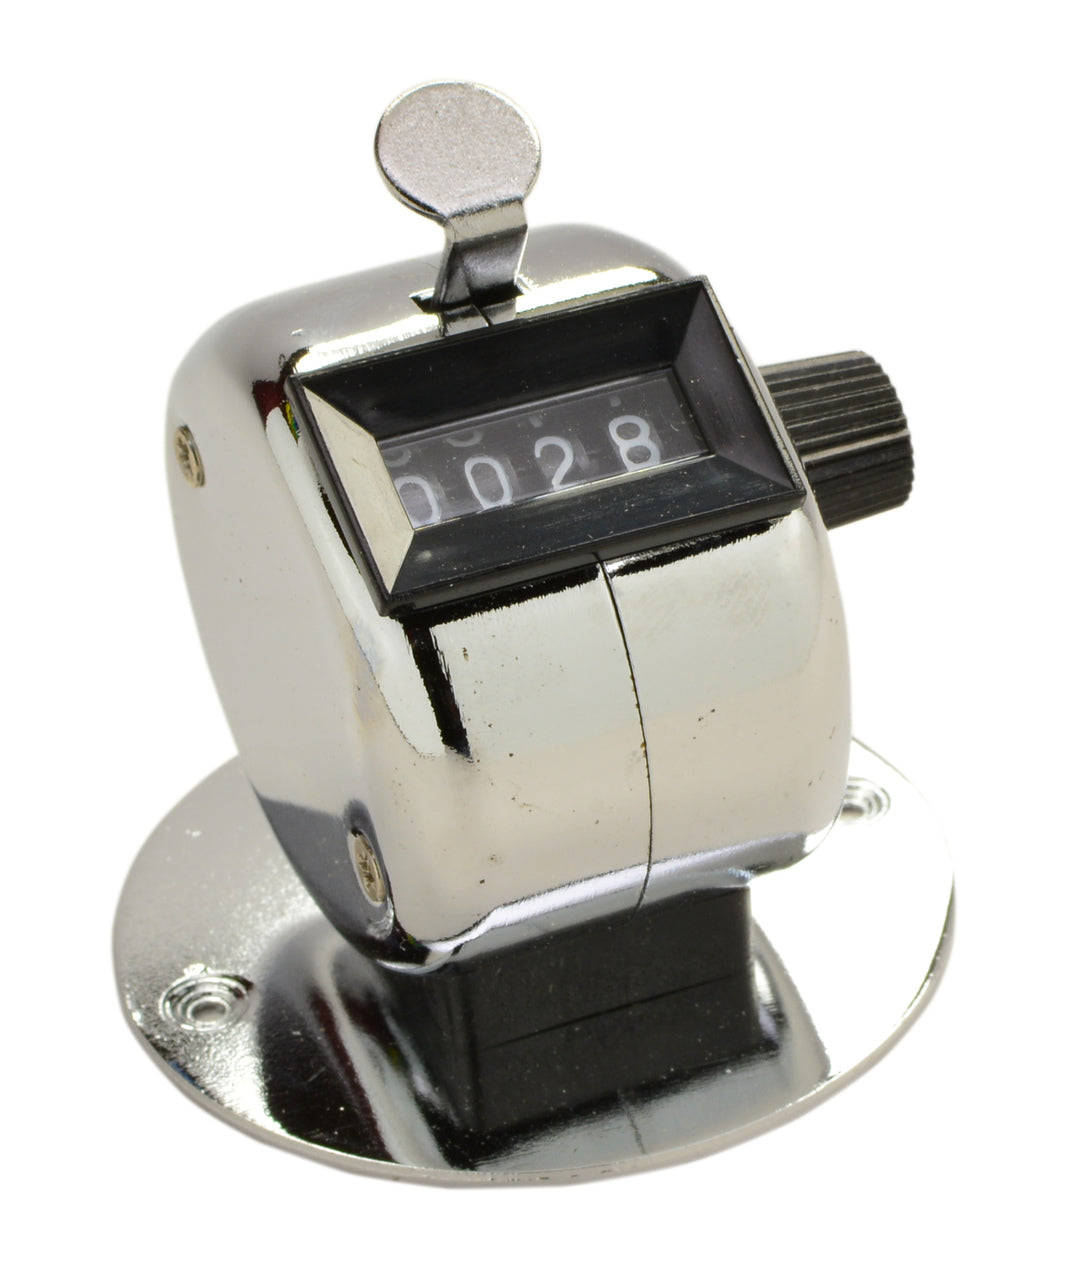 Accusplit AL608 - Mechanical Tally Counters - Frank's Sports Shop